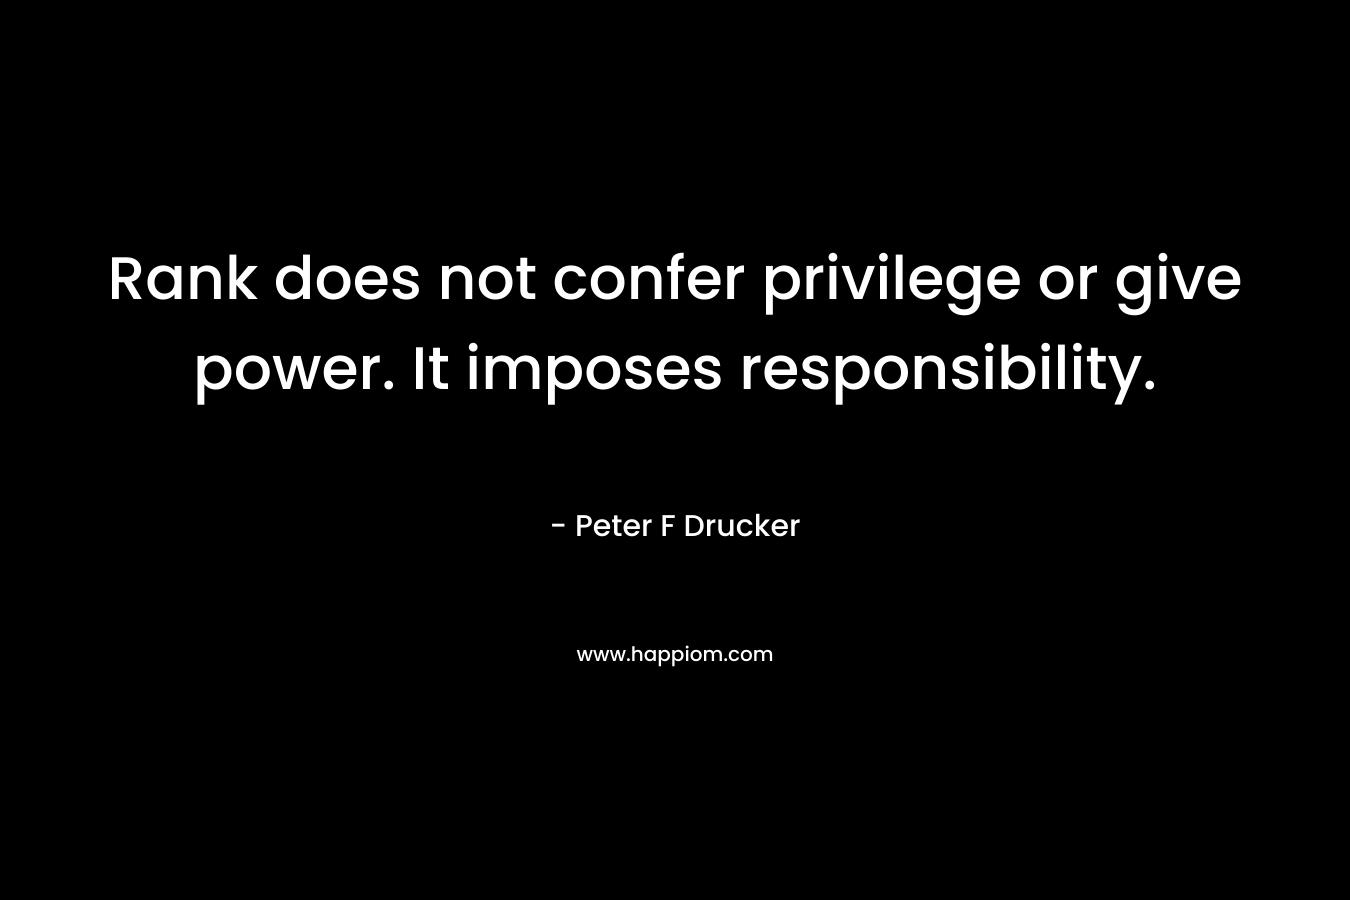 Rank does not confer privilege or give power. It imposes responsibility. – Peter F Drucker